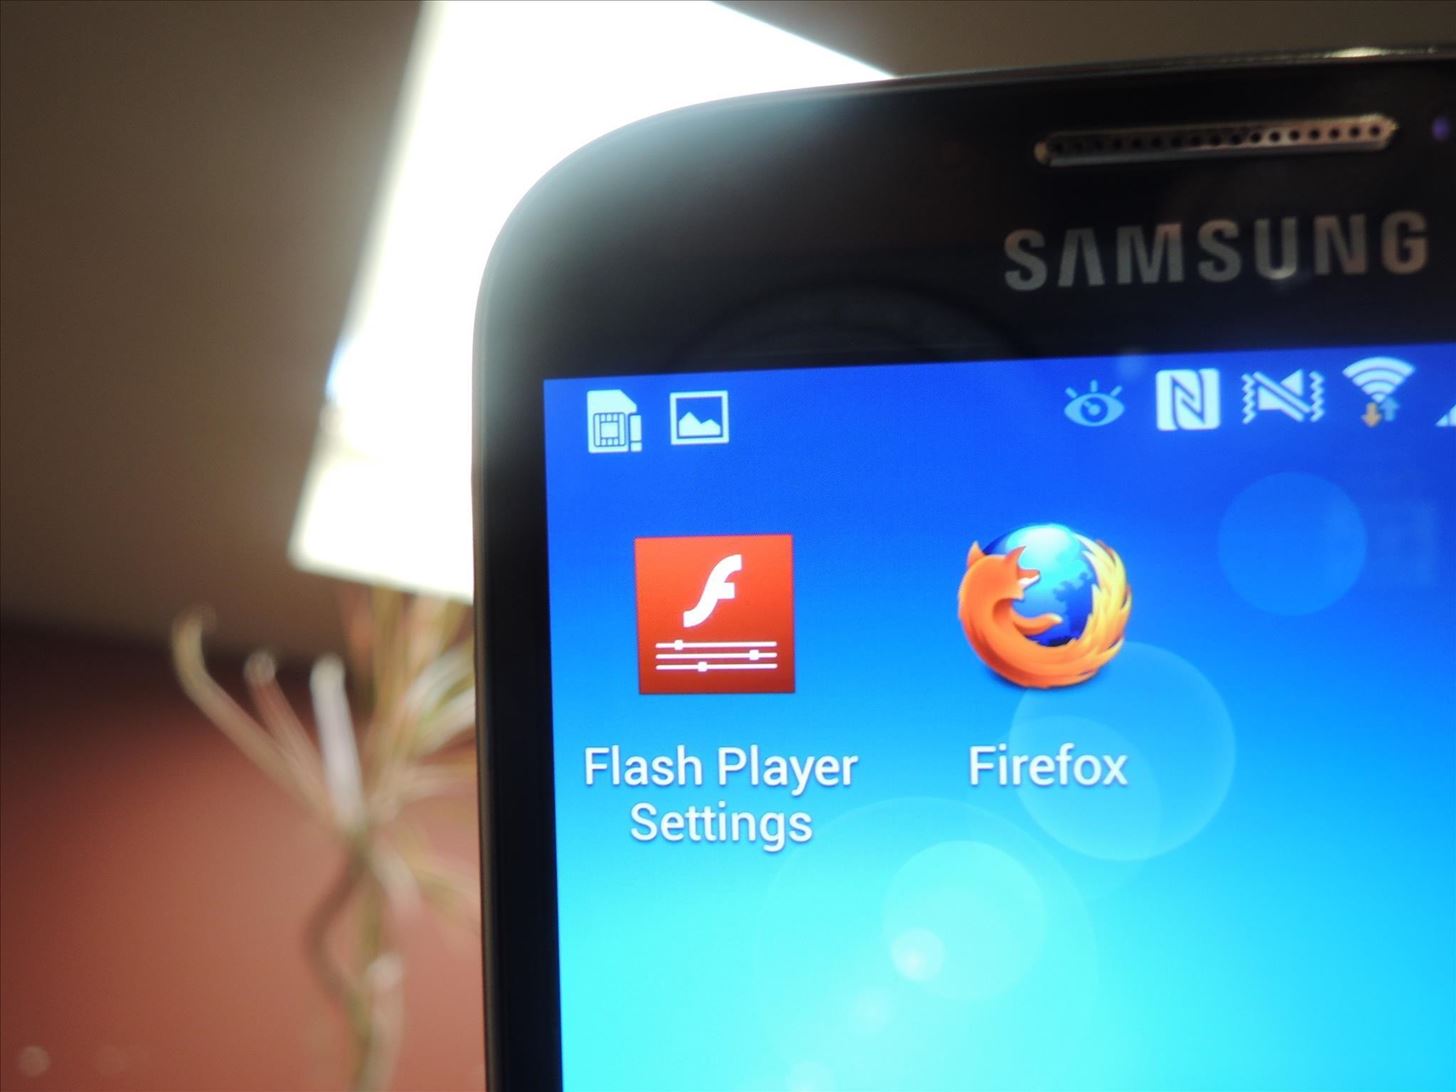 How to Install Adobe Flash Player on a Samsung Galaxy S4 to Watch Amazon Instant Videos & More